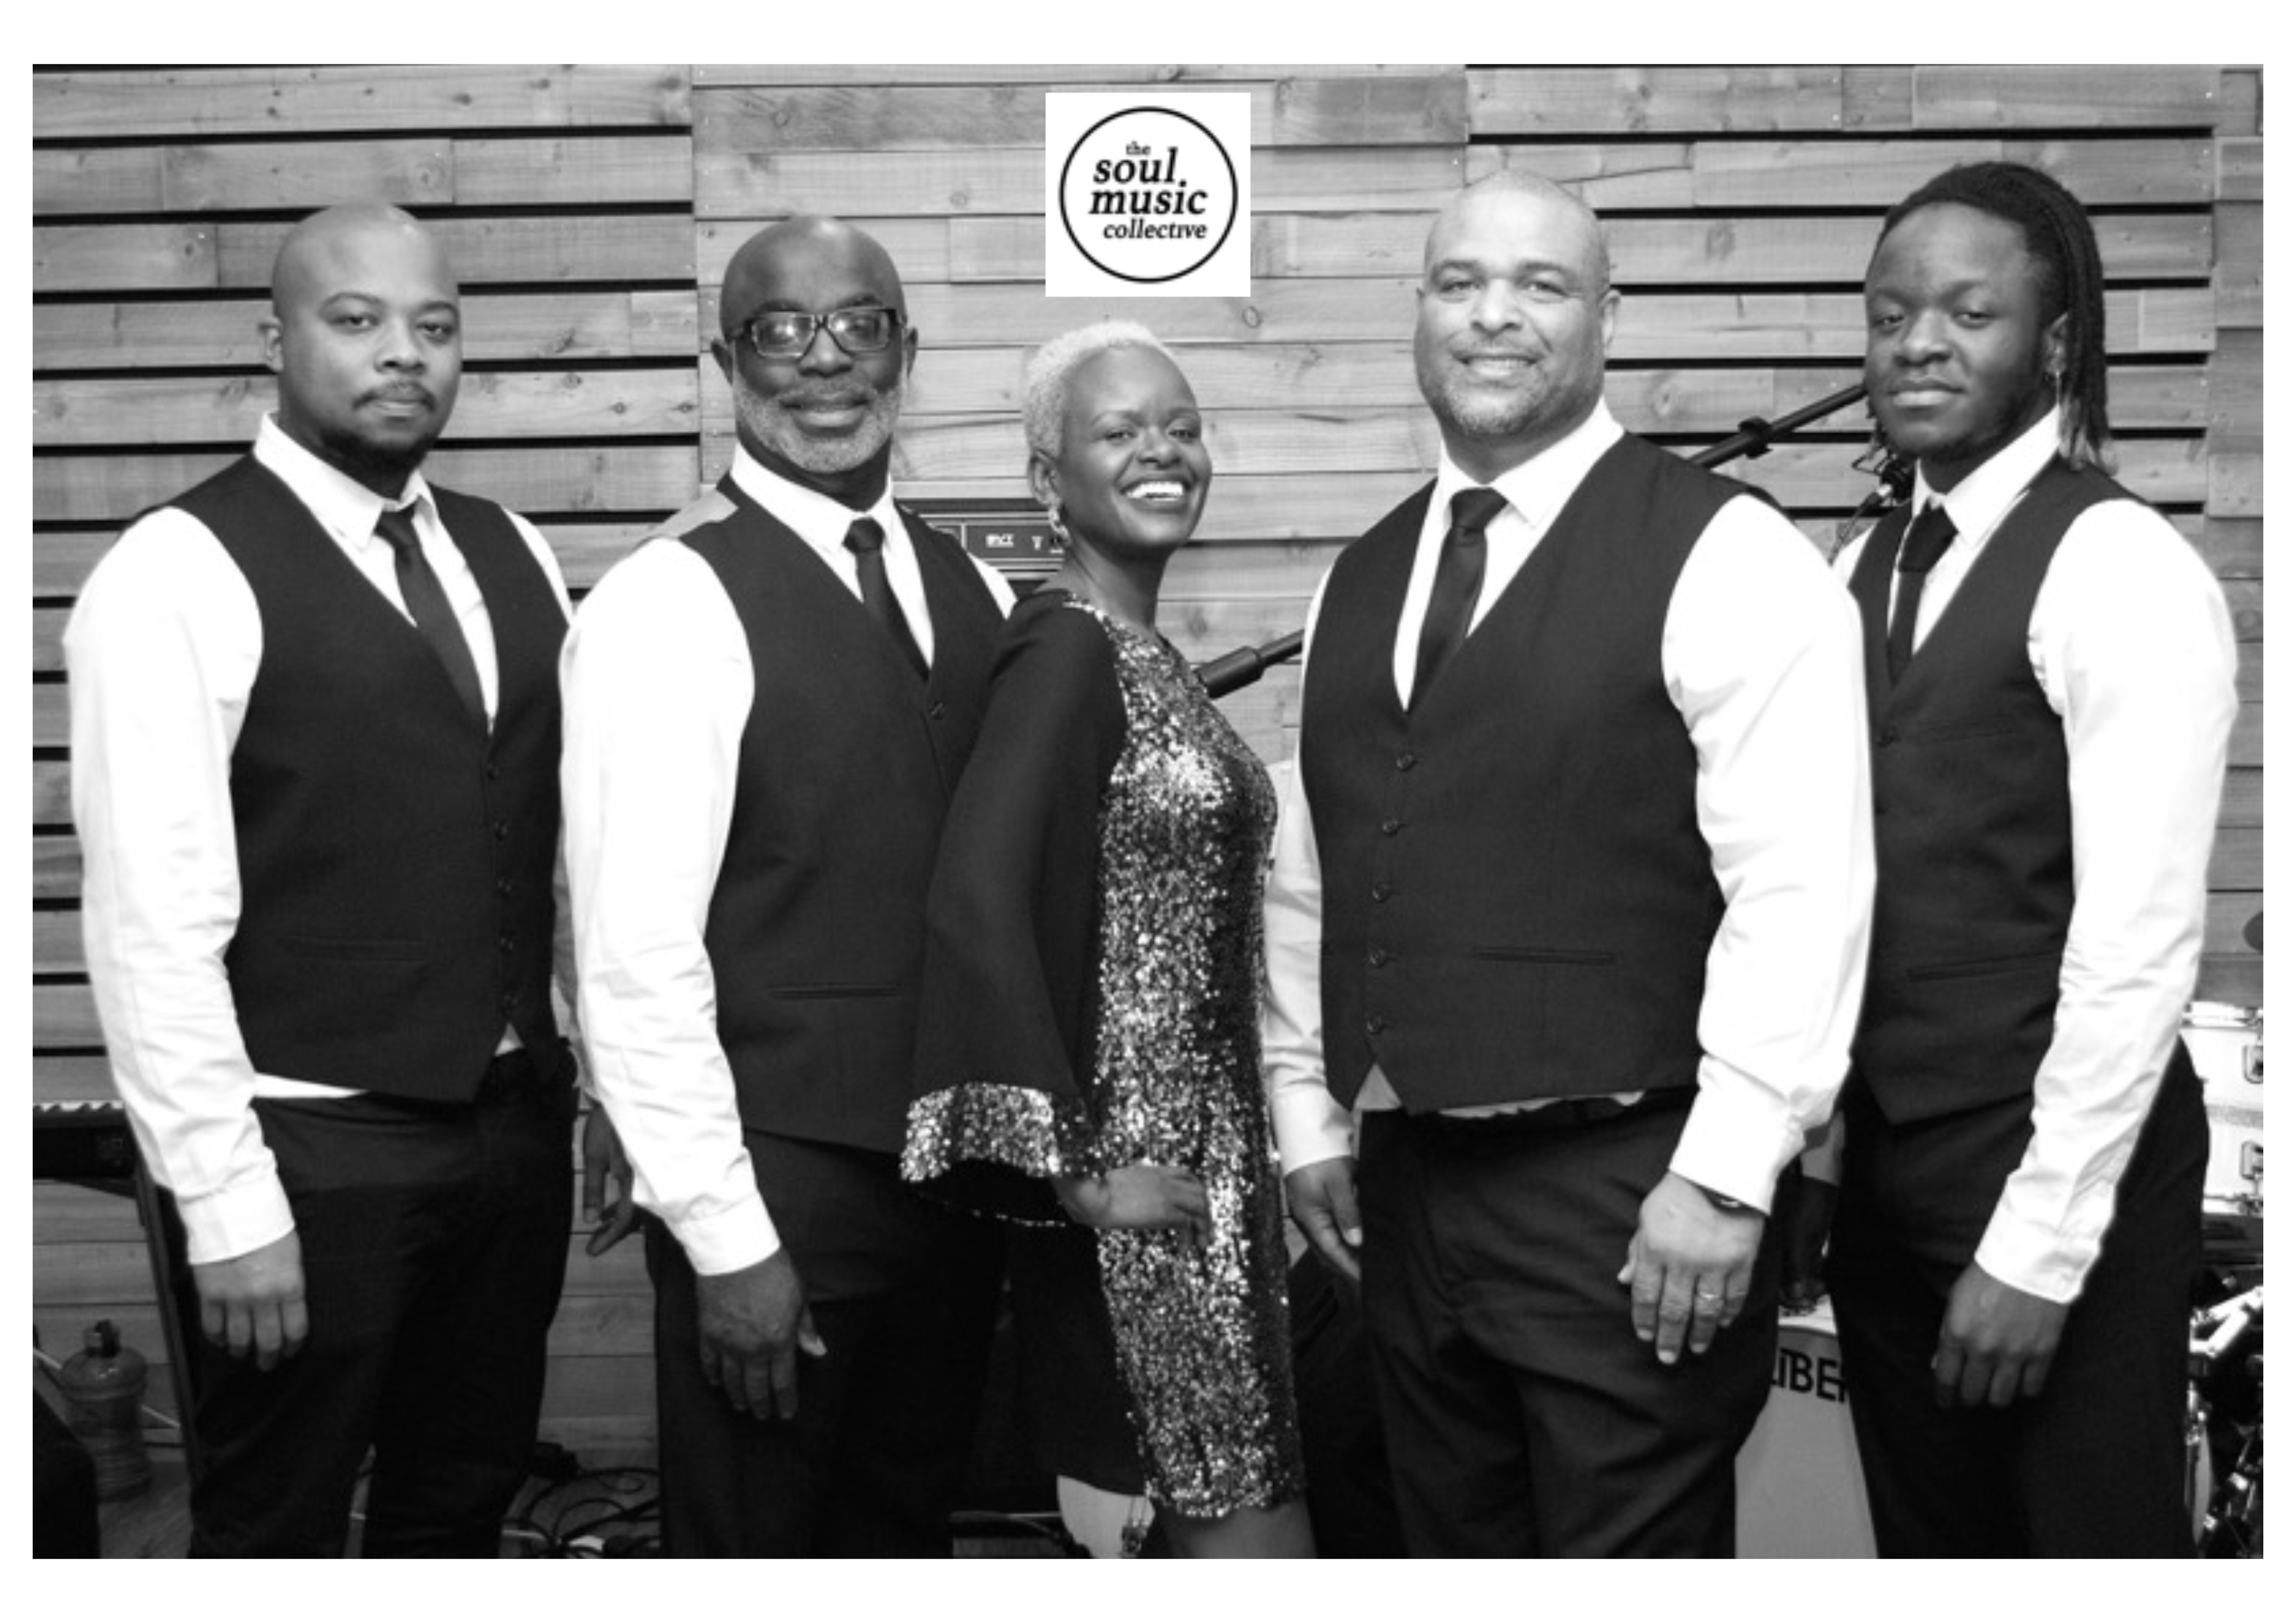 LIVE MUSIC - The Soul Music Collective